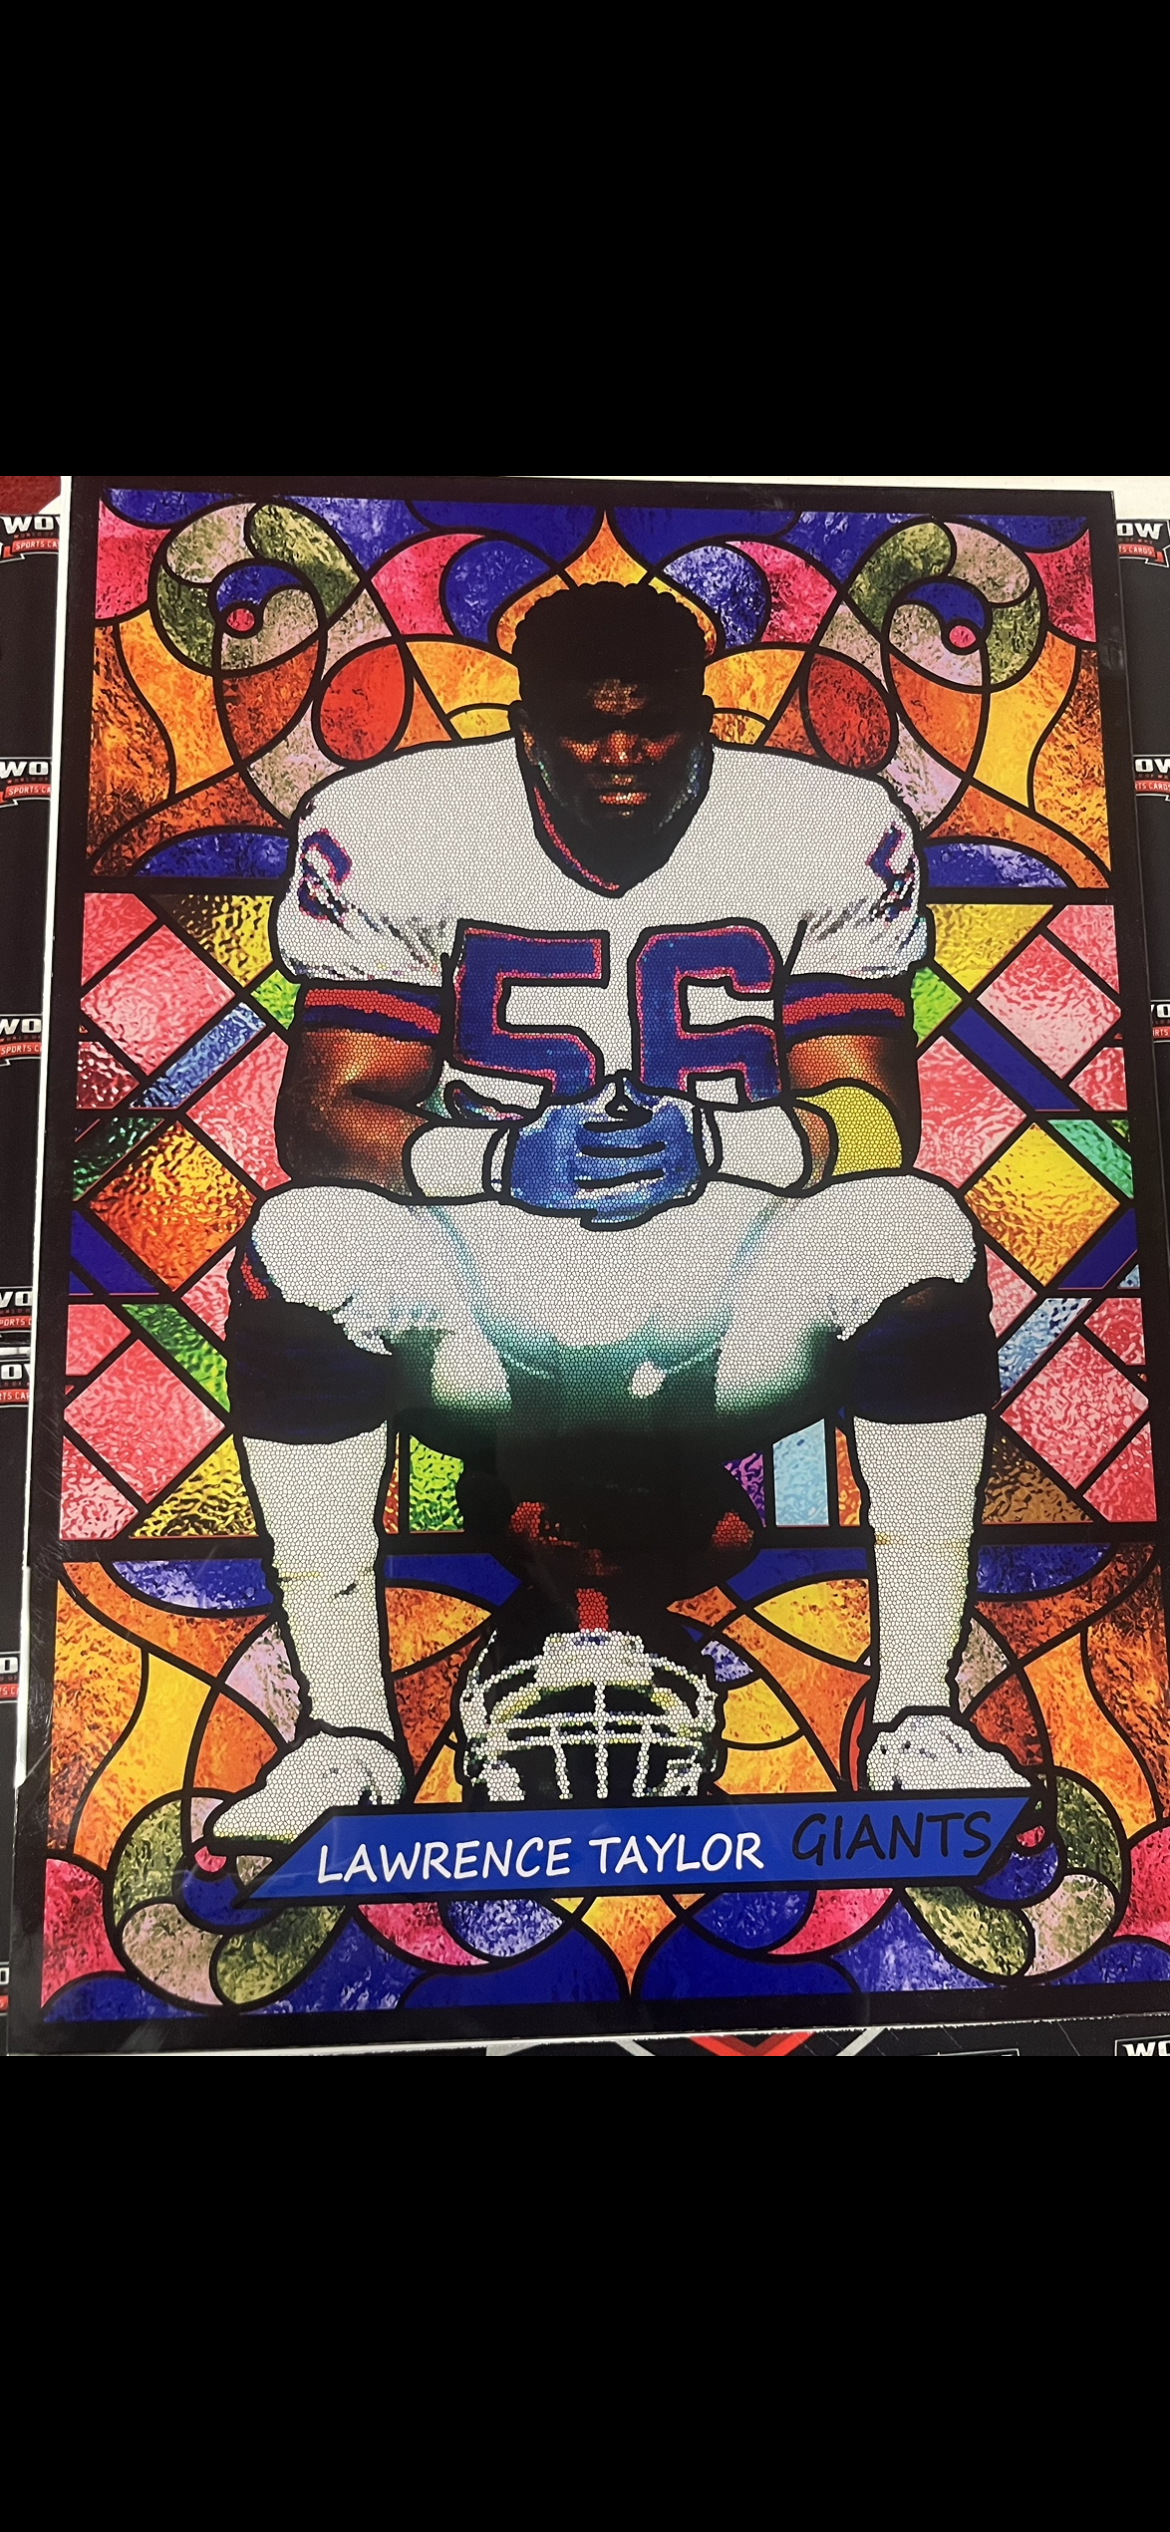 Lawrence Taylor Stained Glass Mosaic Print